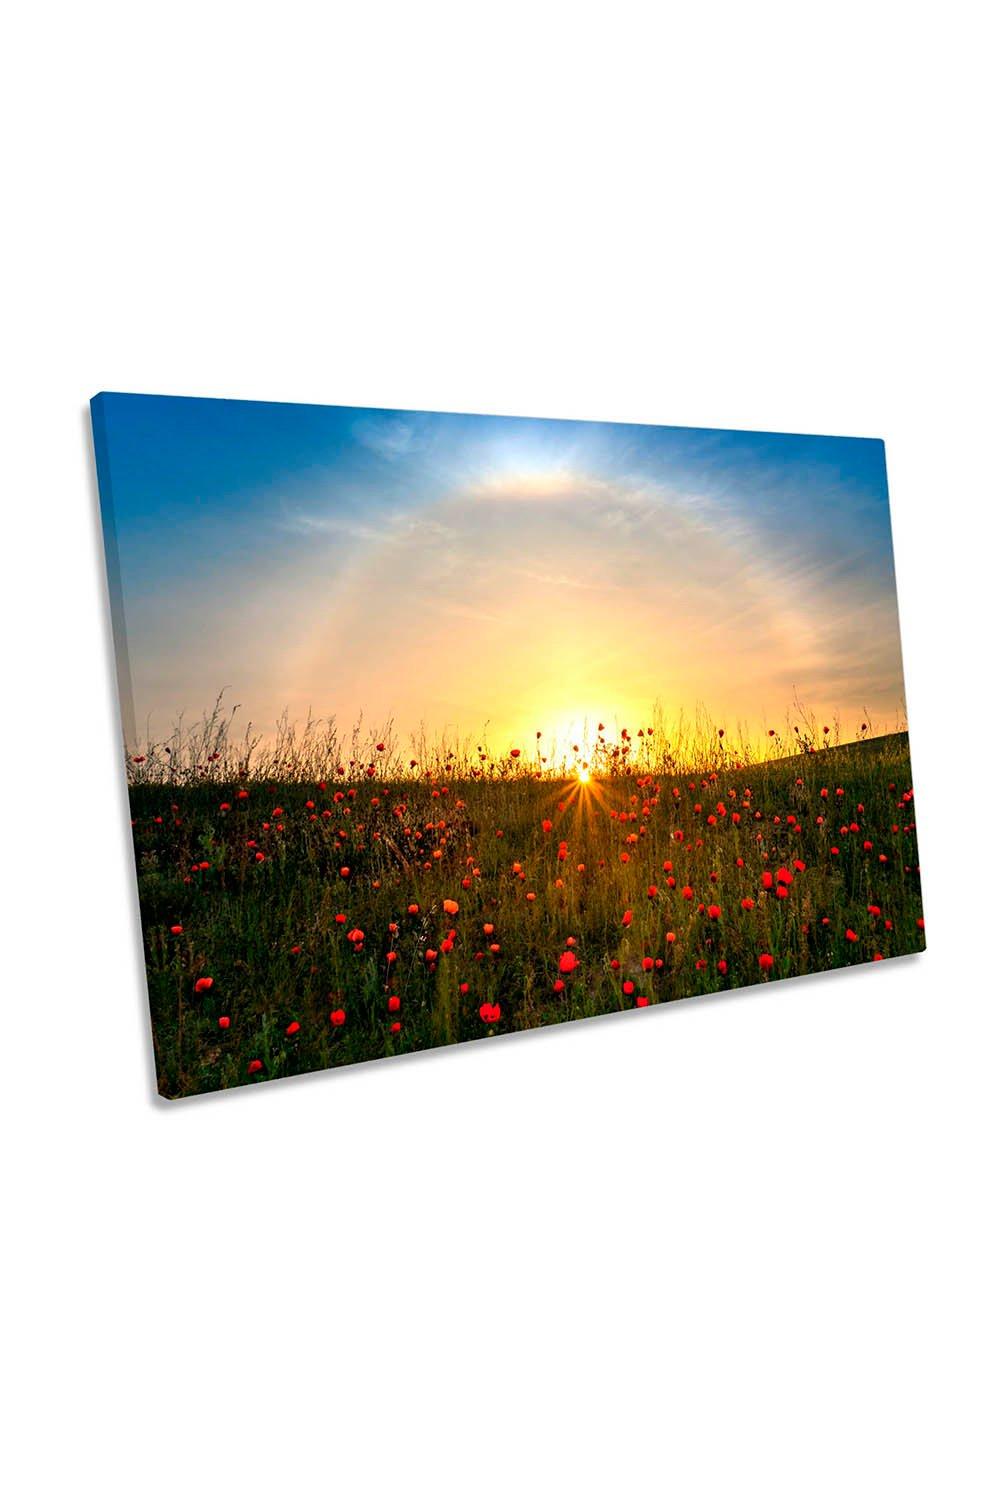 Red Poppies and Sunrise Landscape Flowers Canvas Wall Art Picture Print